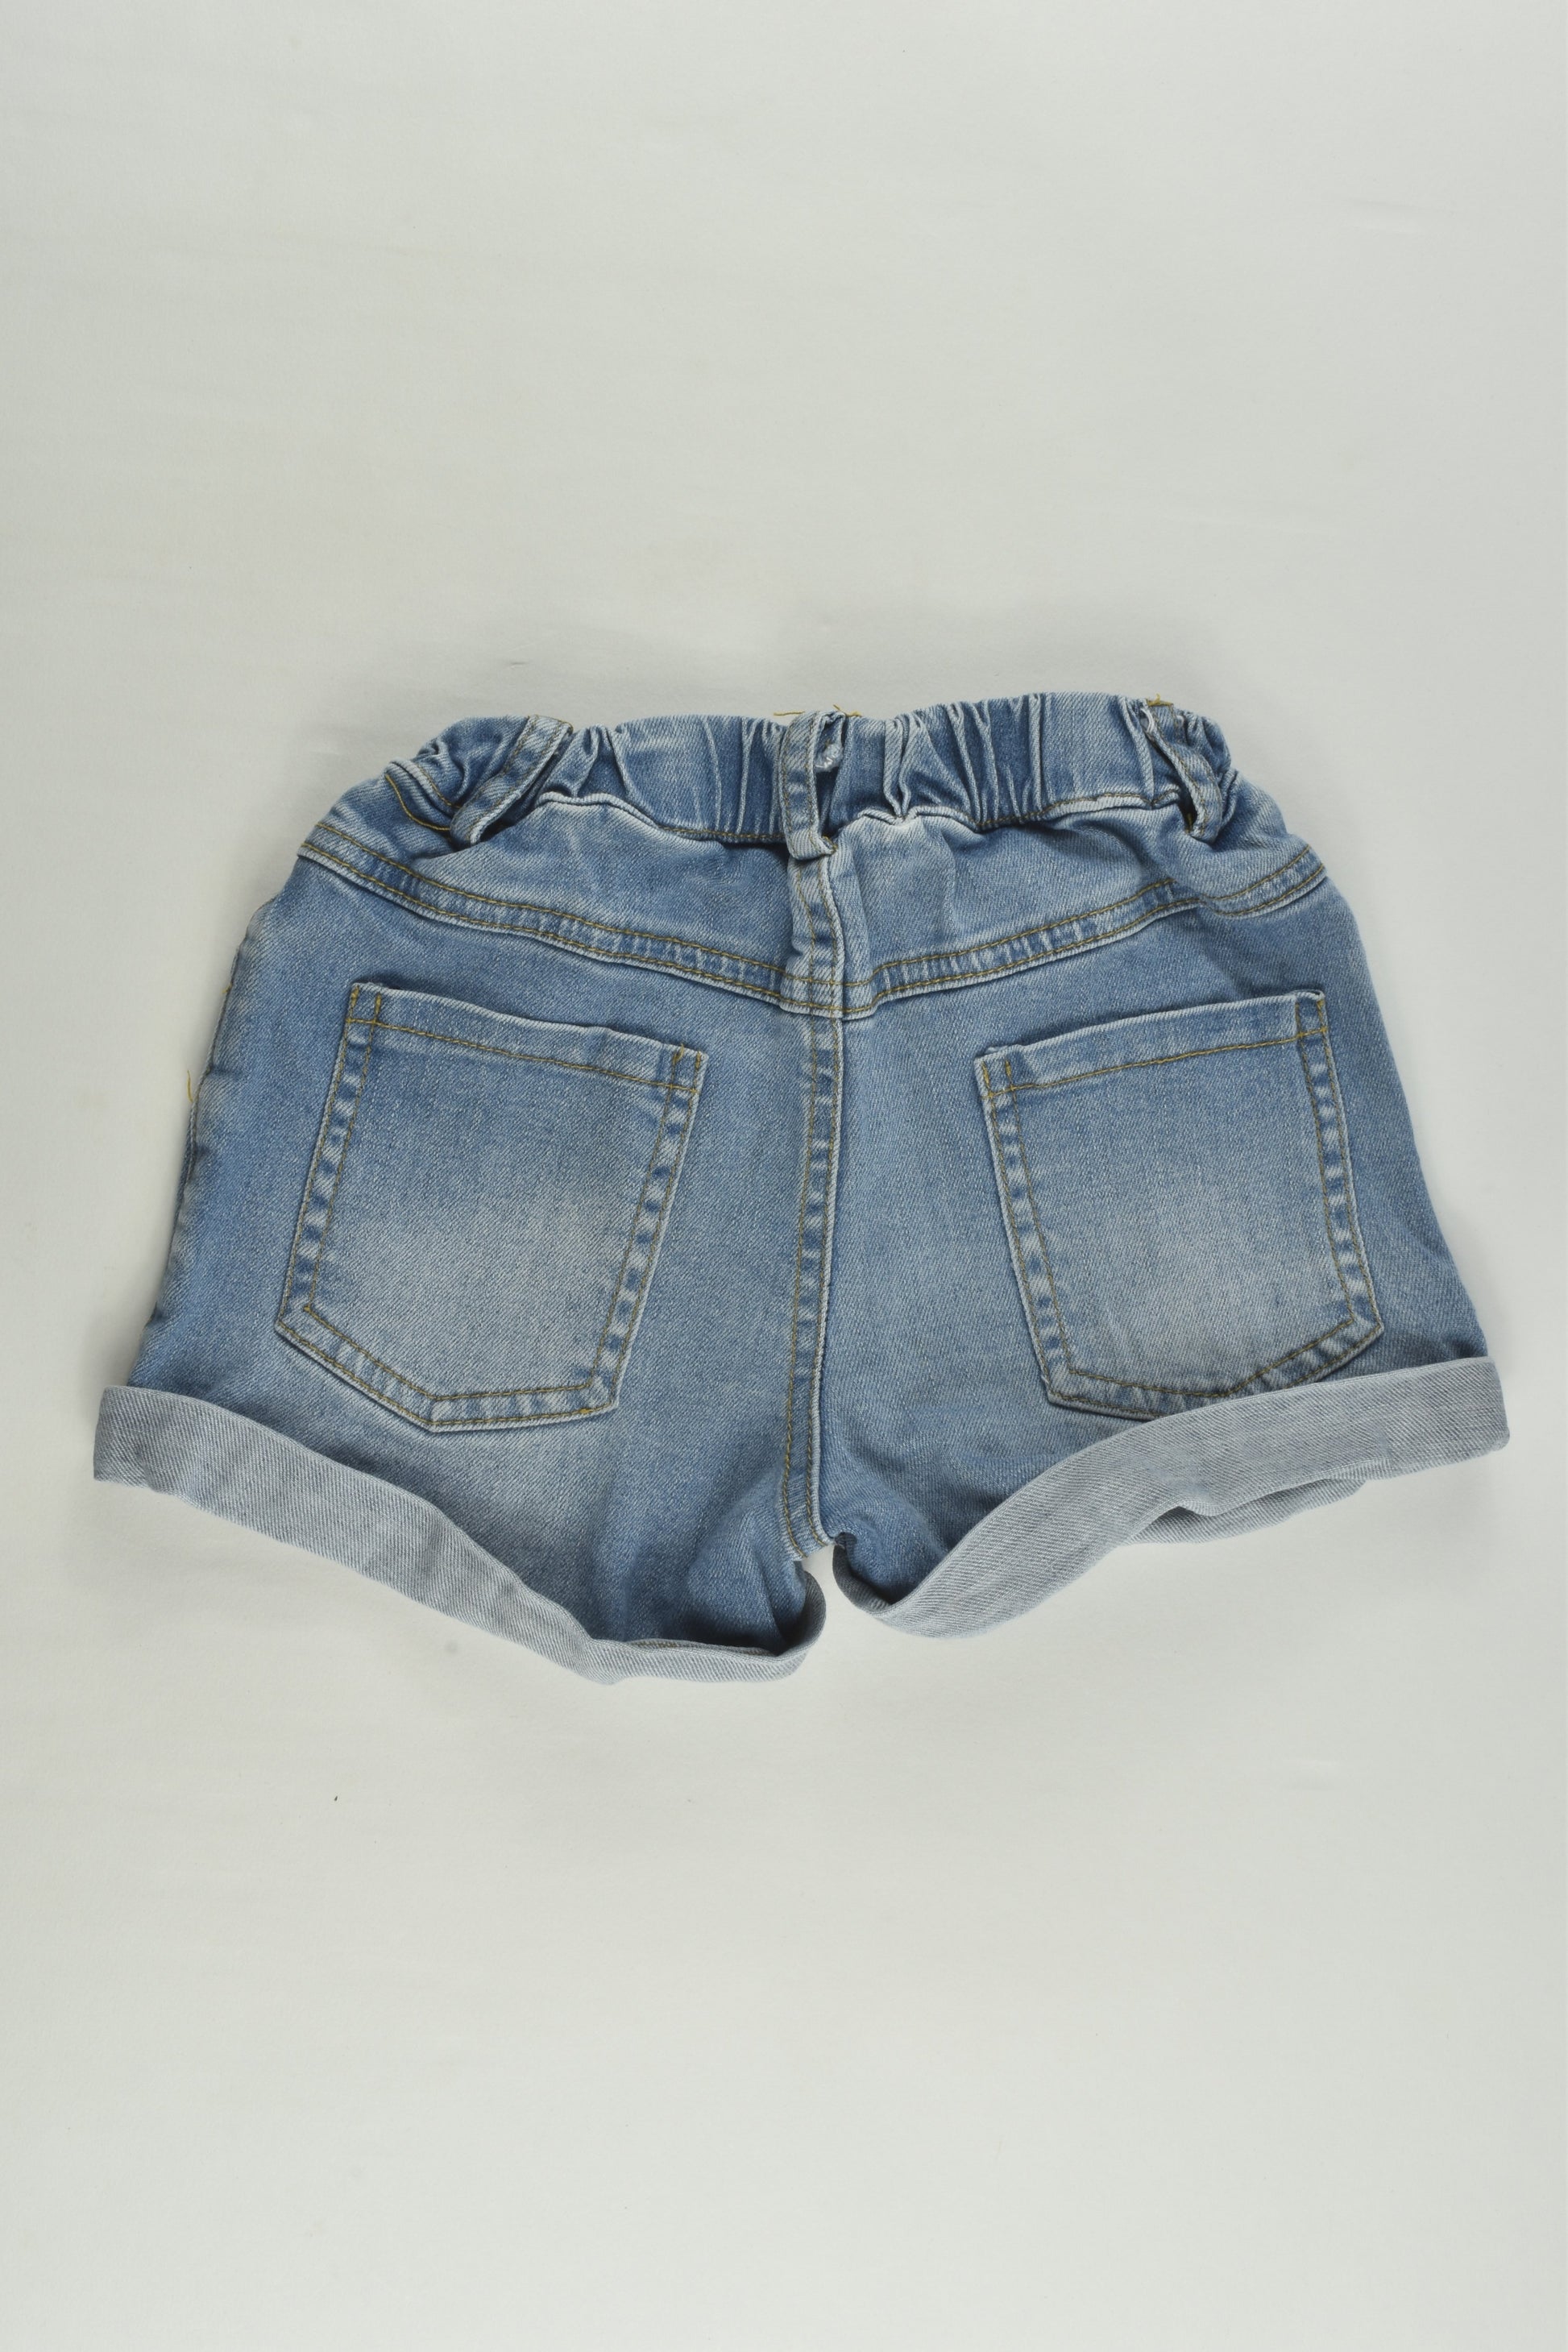 Brand Unknown Size approx 3-4 Stretchy Denim Shorts